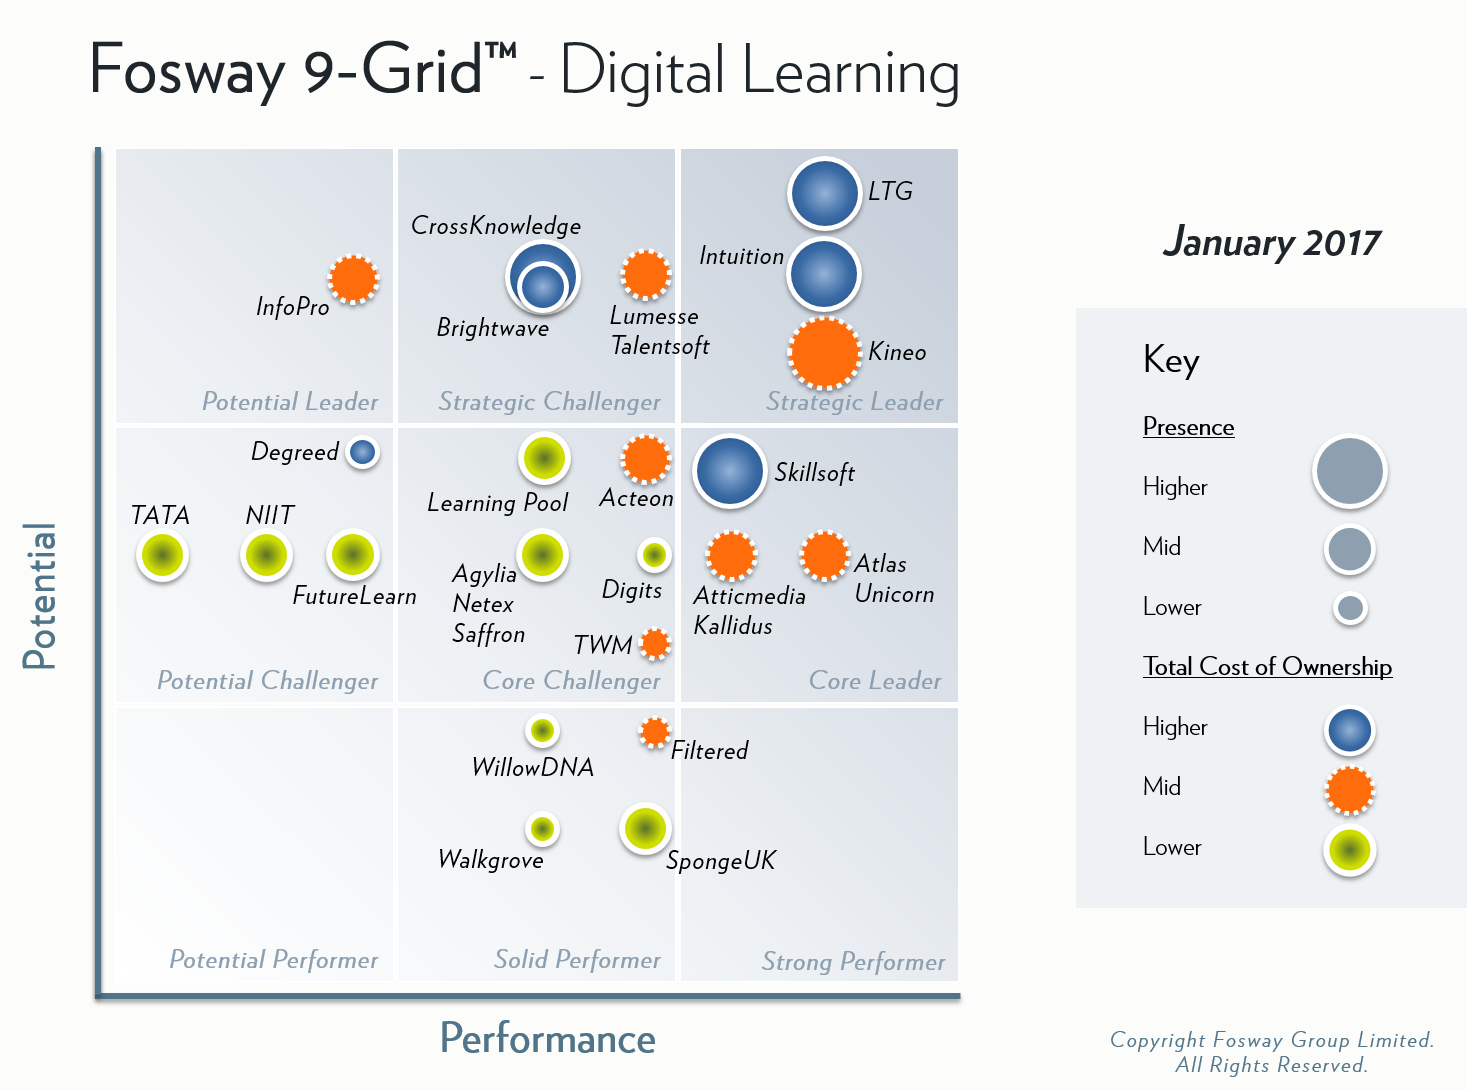 2017 Fosway 9-Grid™ for Digital Learning